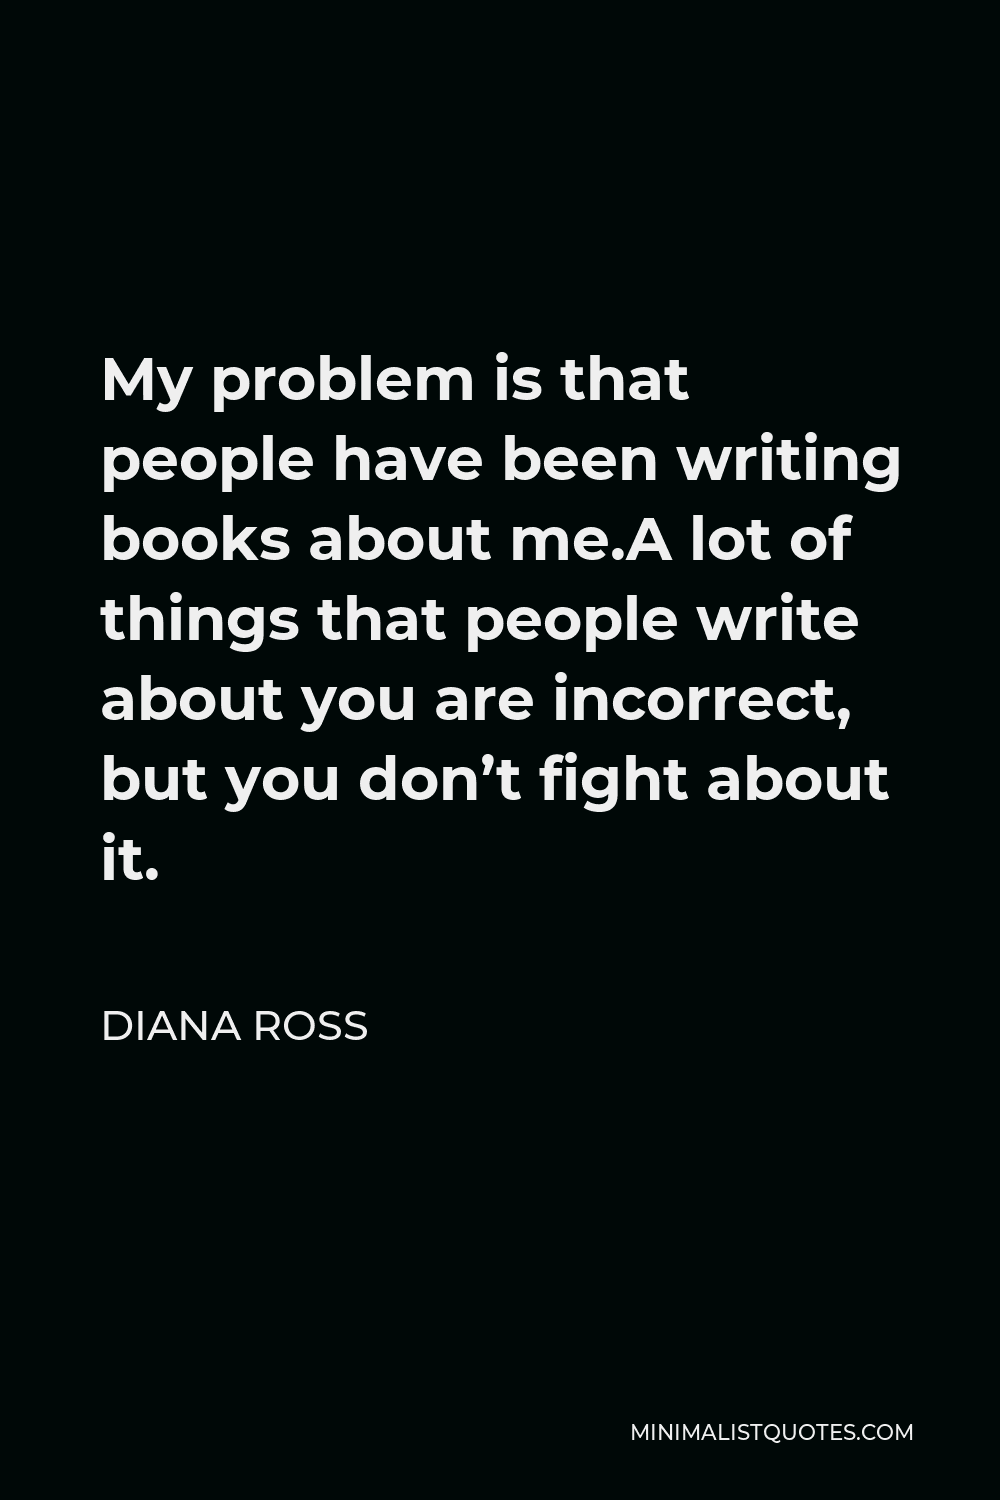 Diana Ross Quote - My problem is that people have been writing books about me.A lot of things that people write about you are incorrect, but you don’t fight about it.